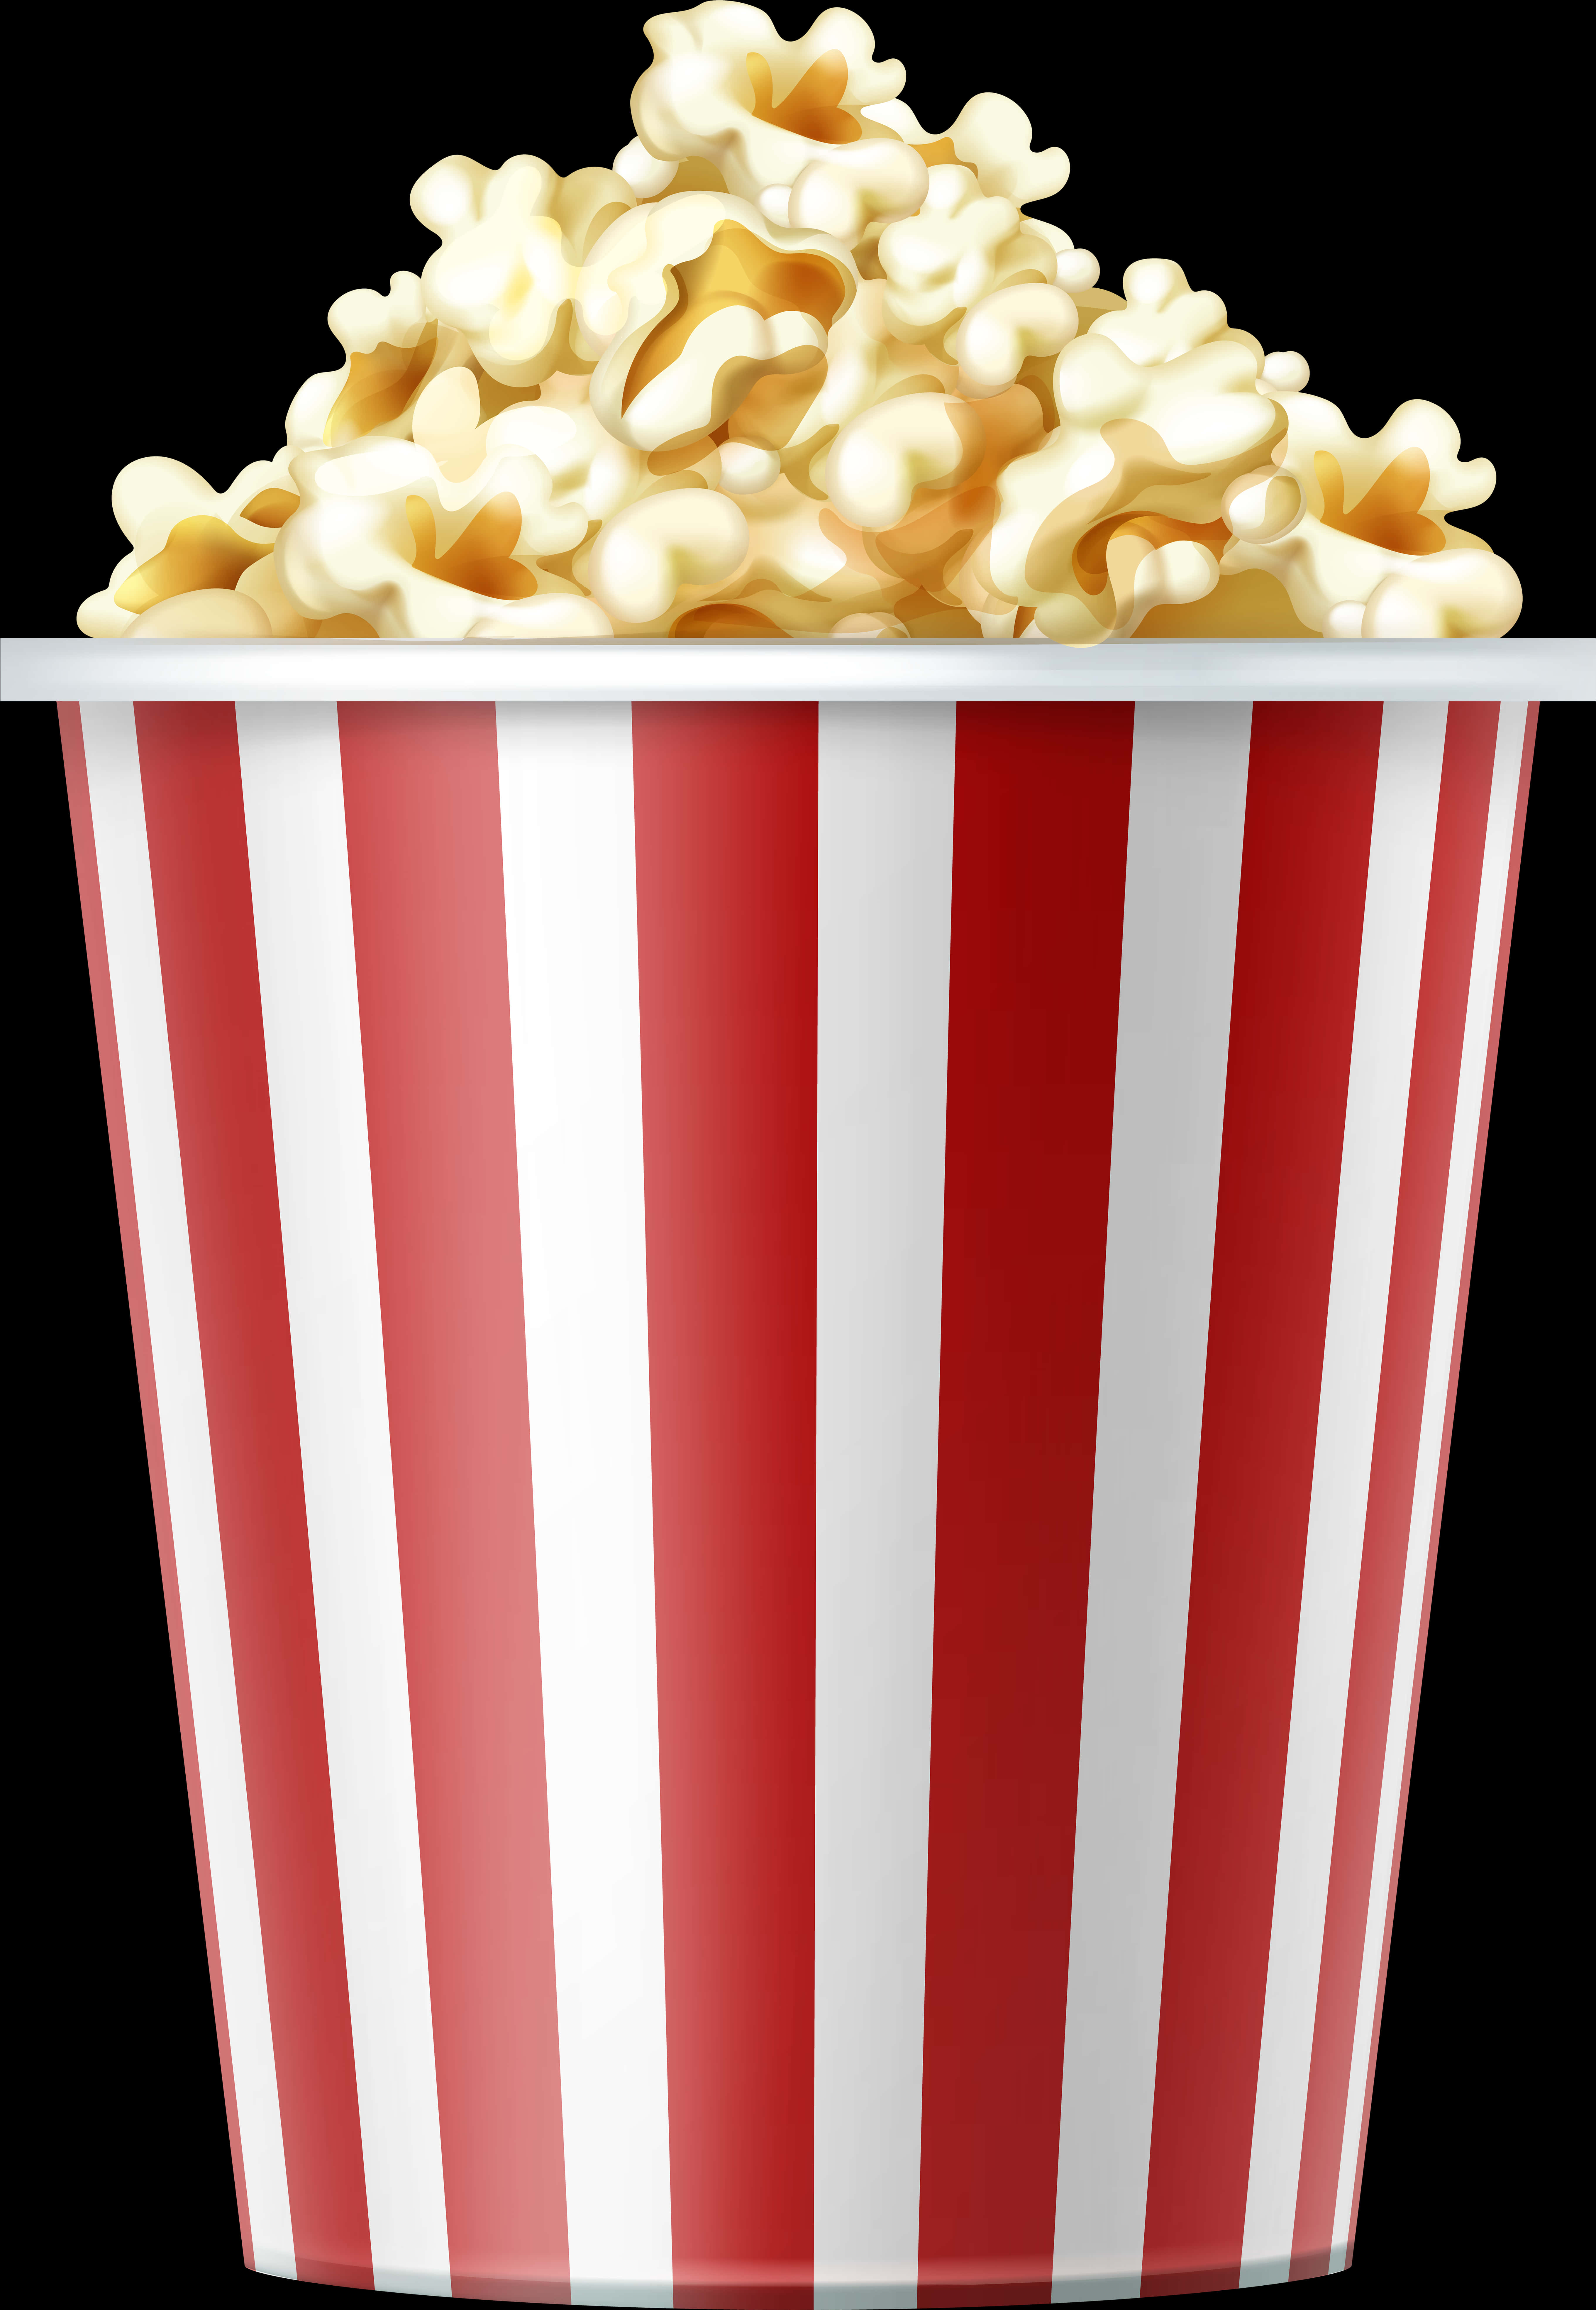 Classic Popcorn Bucket Clipart PNG image